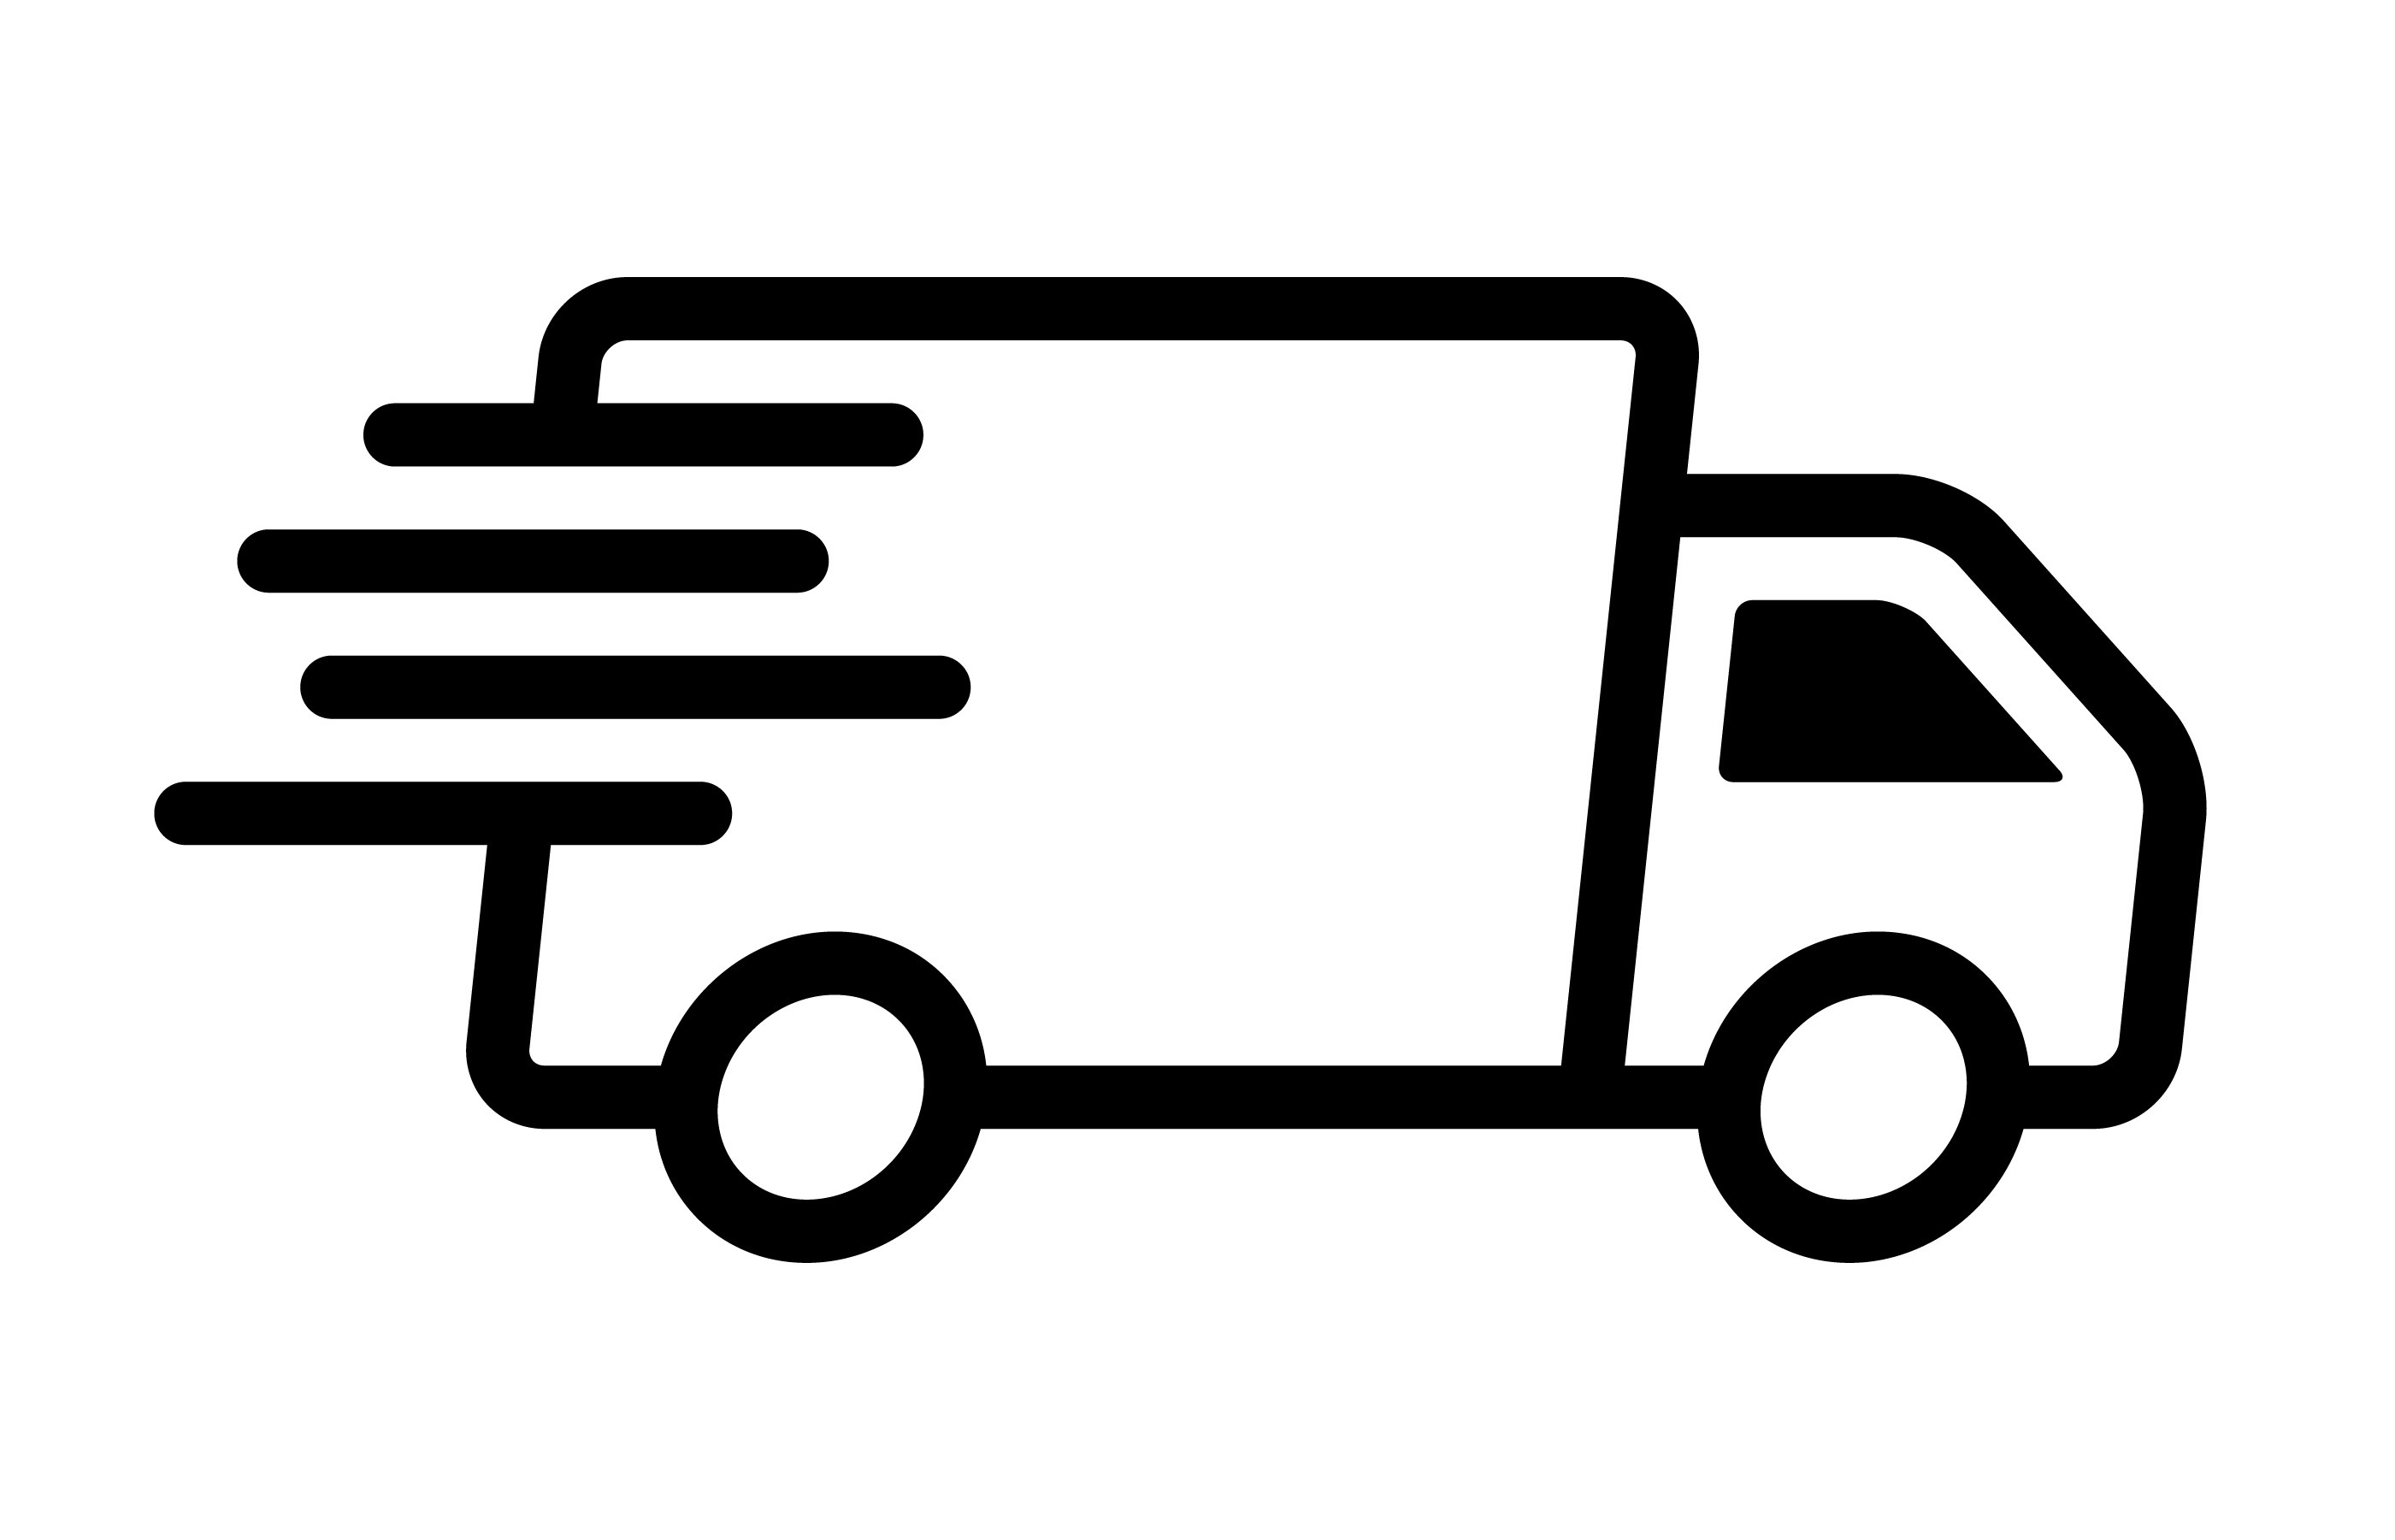 Pay difference for Expedited Shipping